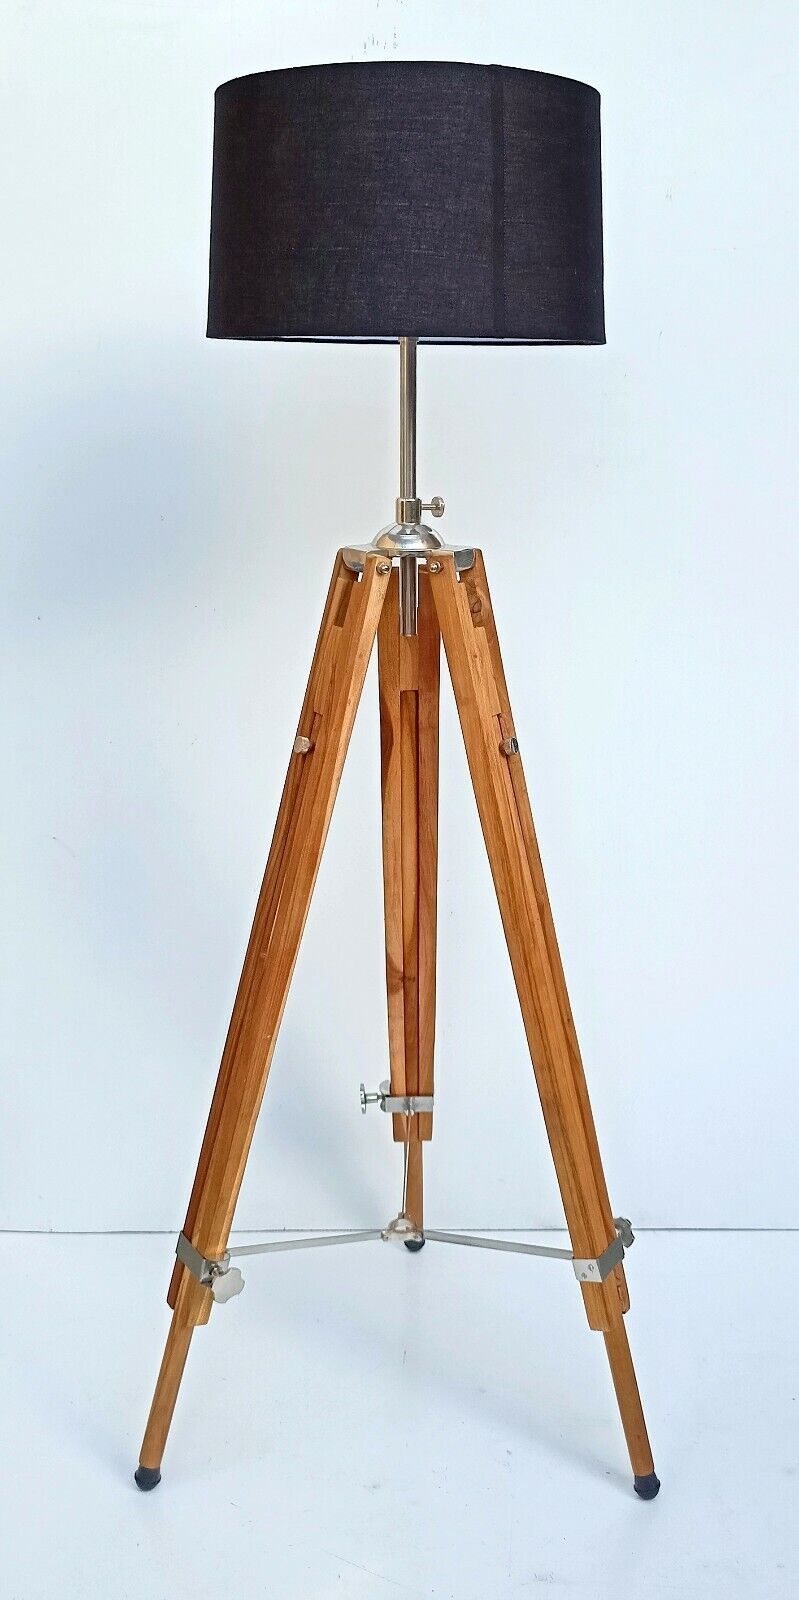 Tripod Floor Lamp Stand Vintage Antique Home Decor Corner Without Shade or Bulb